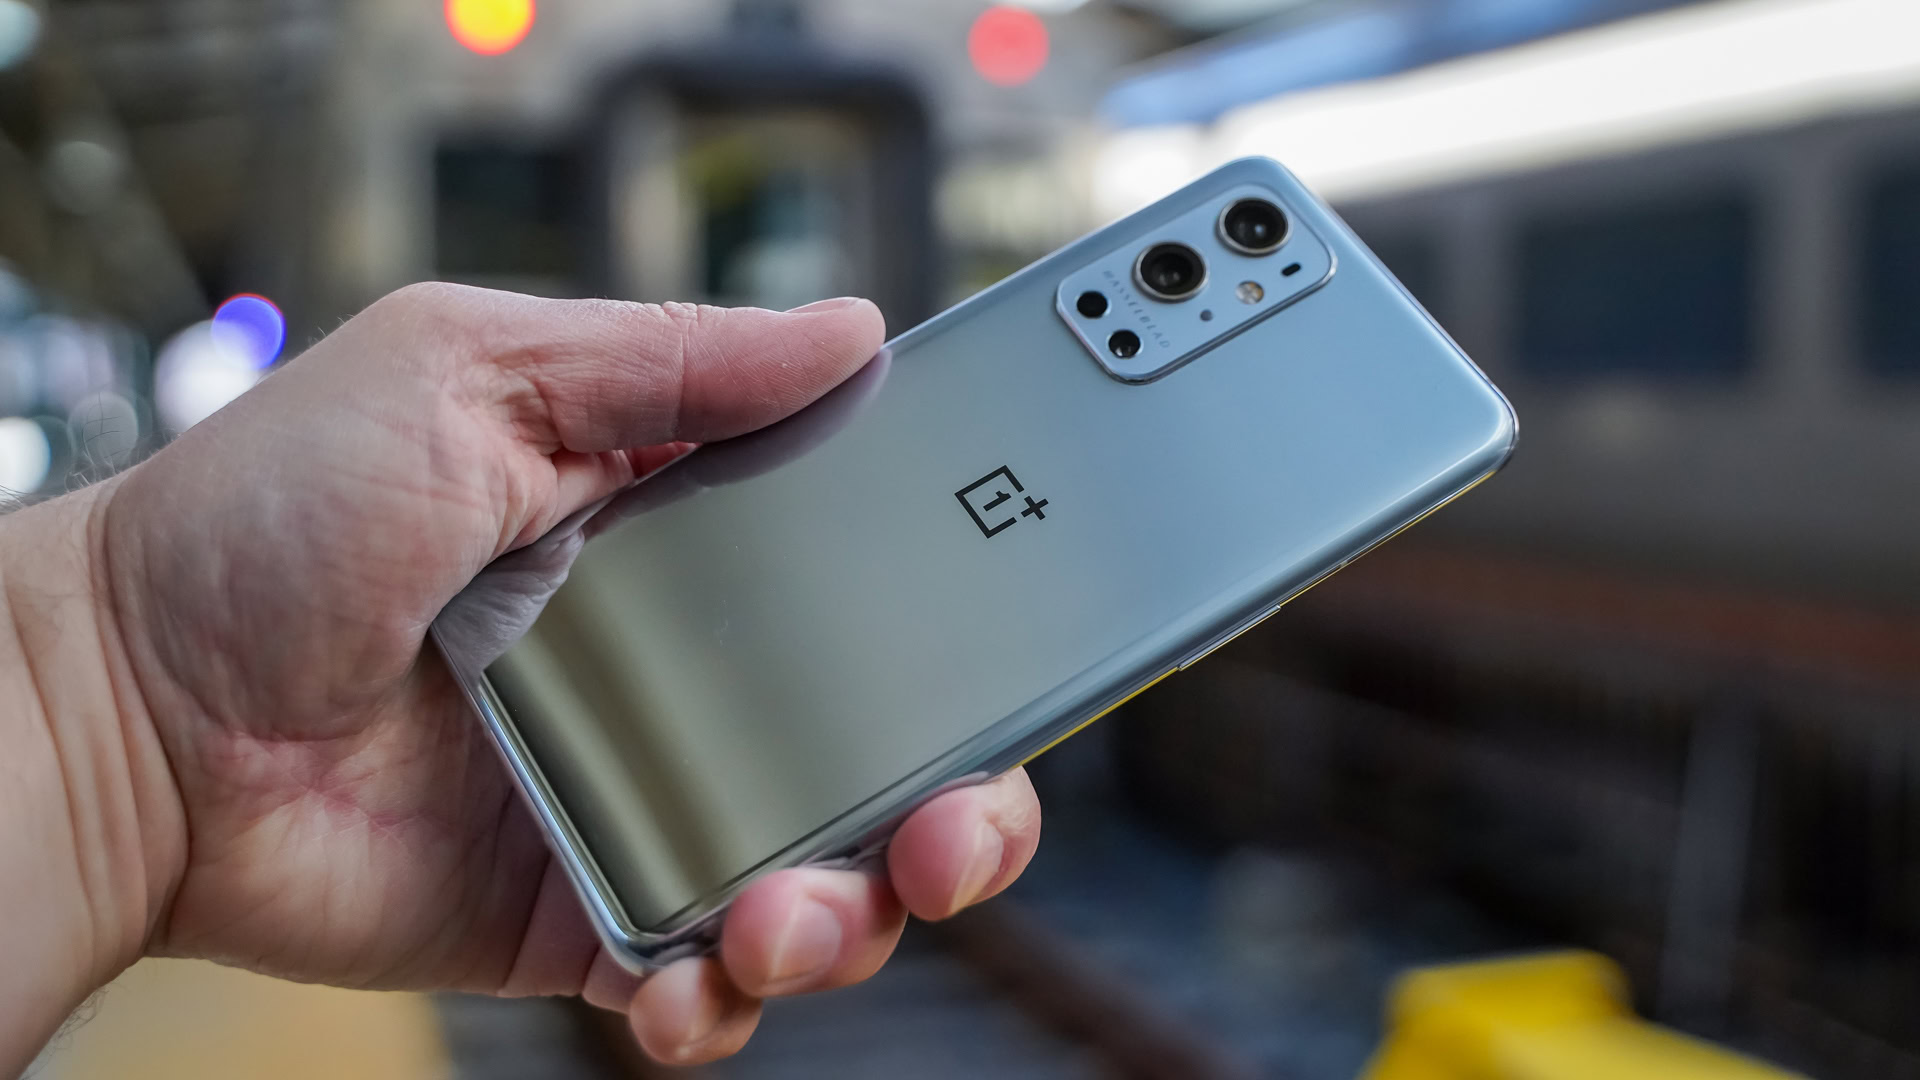 OnePlus 9 Pro review revisted: The good and bad six months later